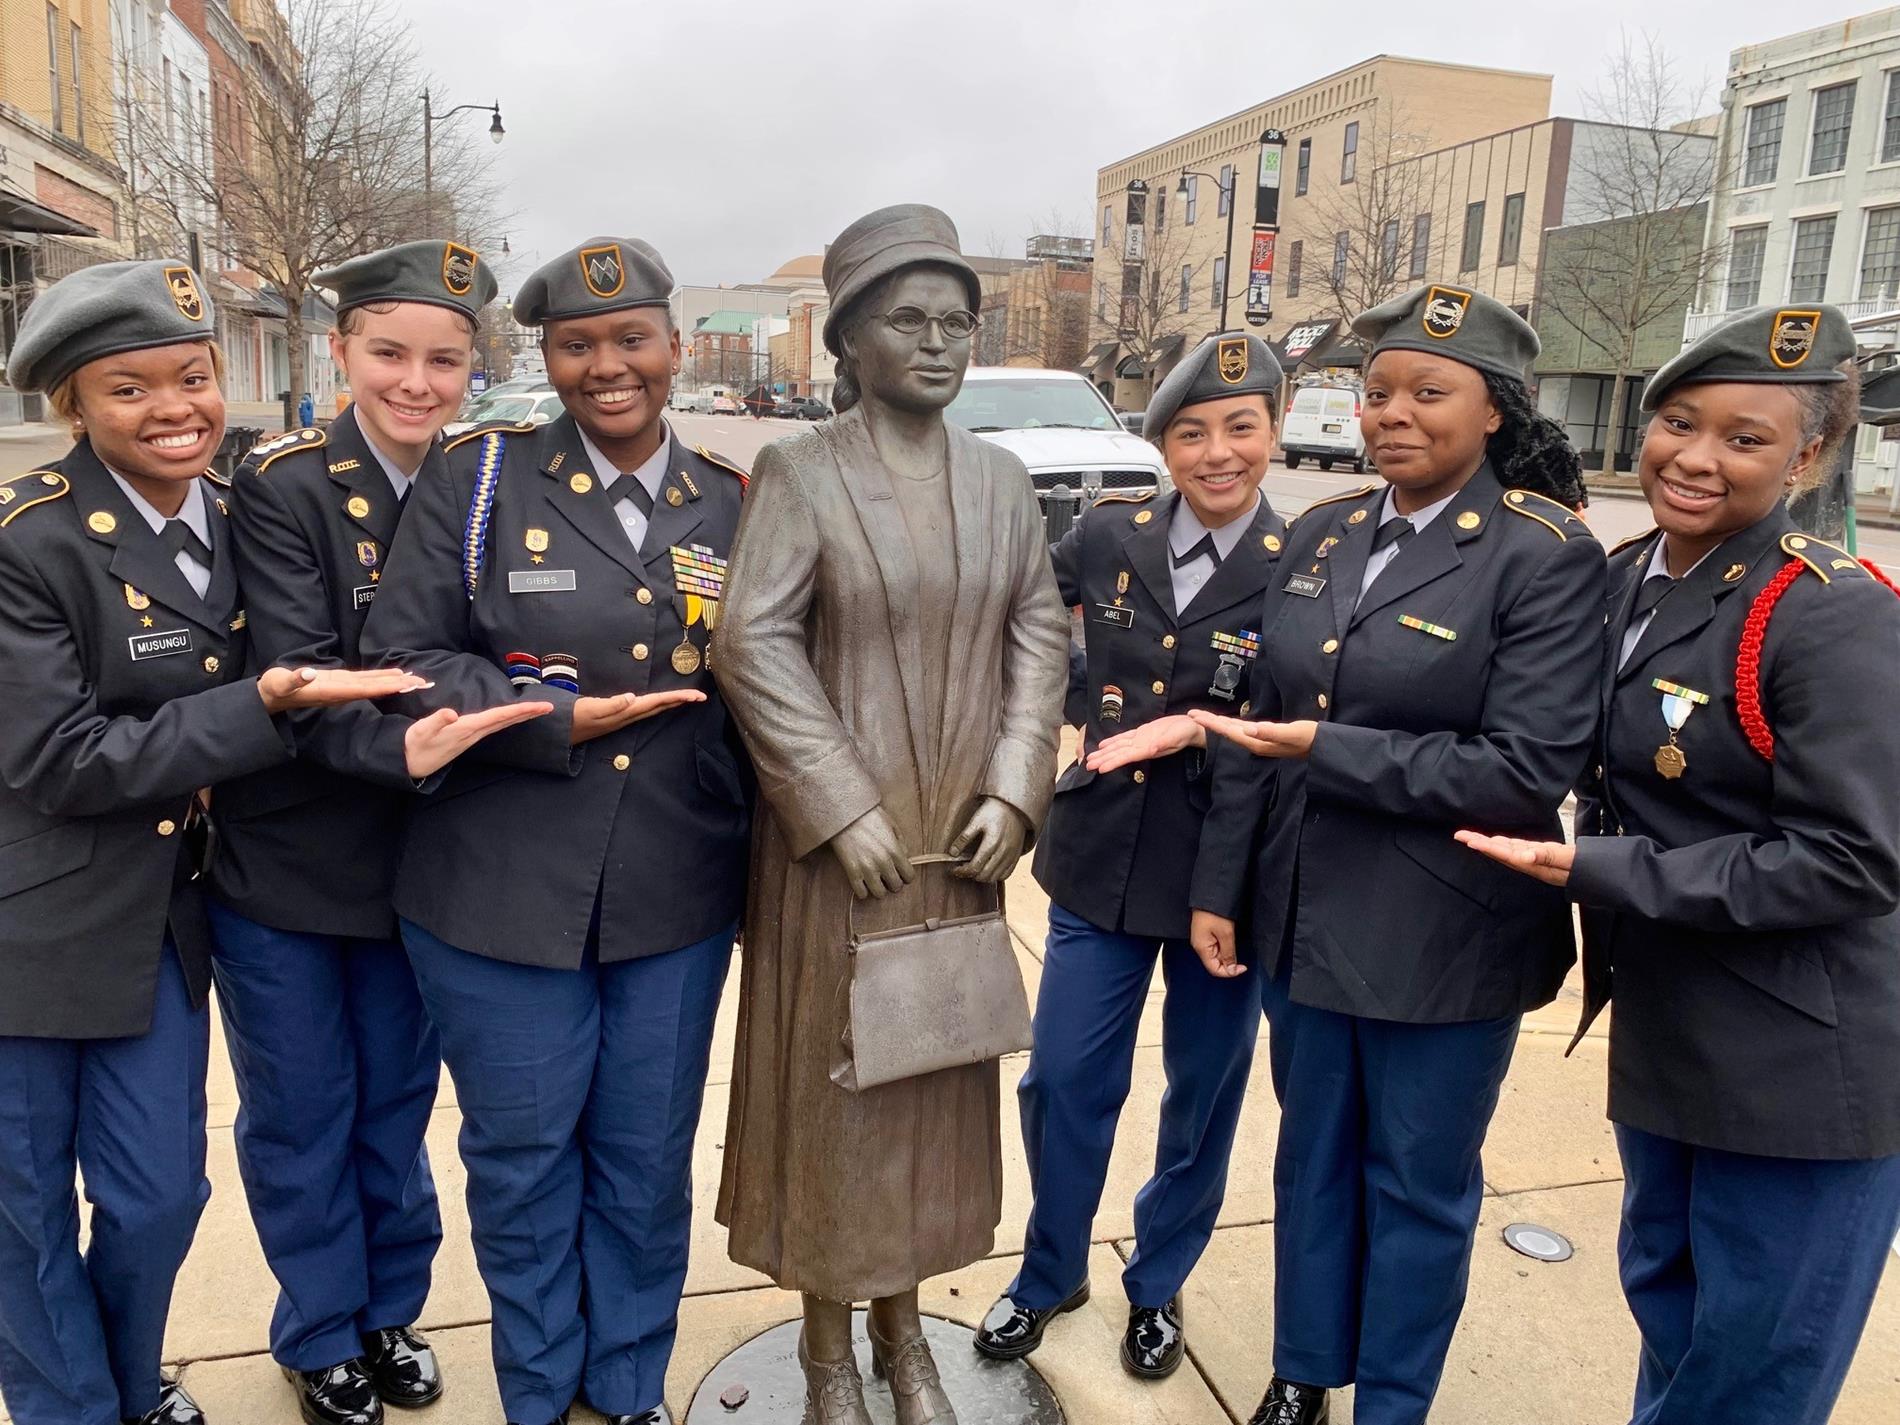 Murphy and Blount JROTC female cadets pose with the Rosa Parks Memorial Bust on Dexter Avenue in Montgomery, Alabama.